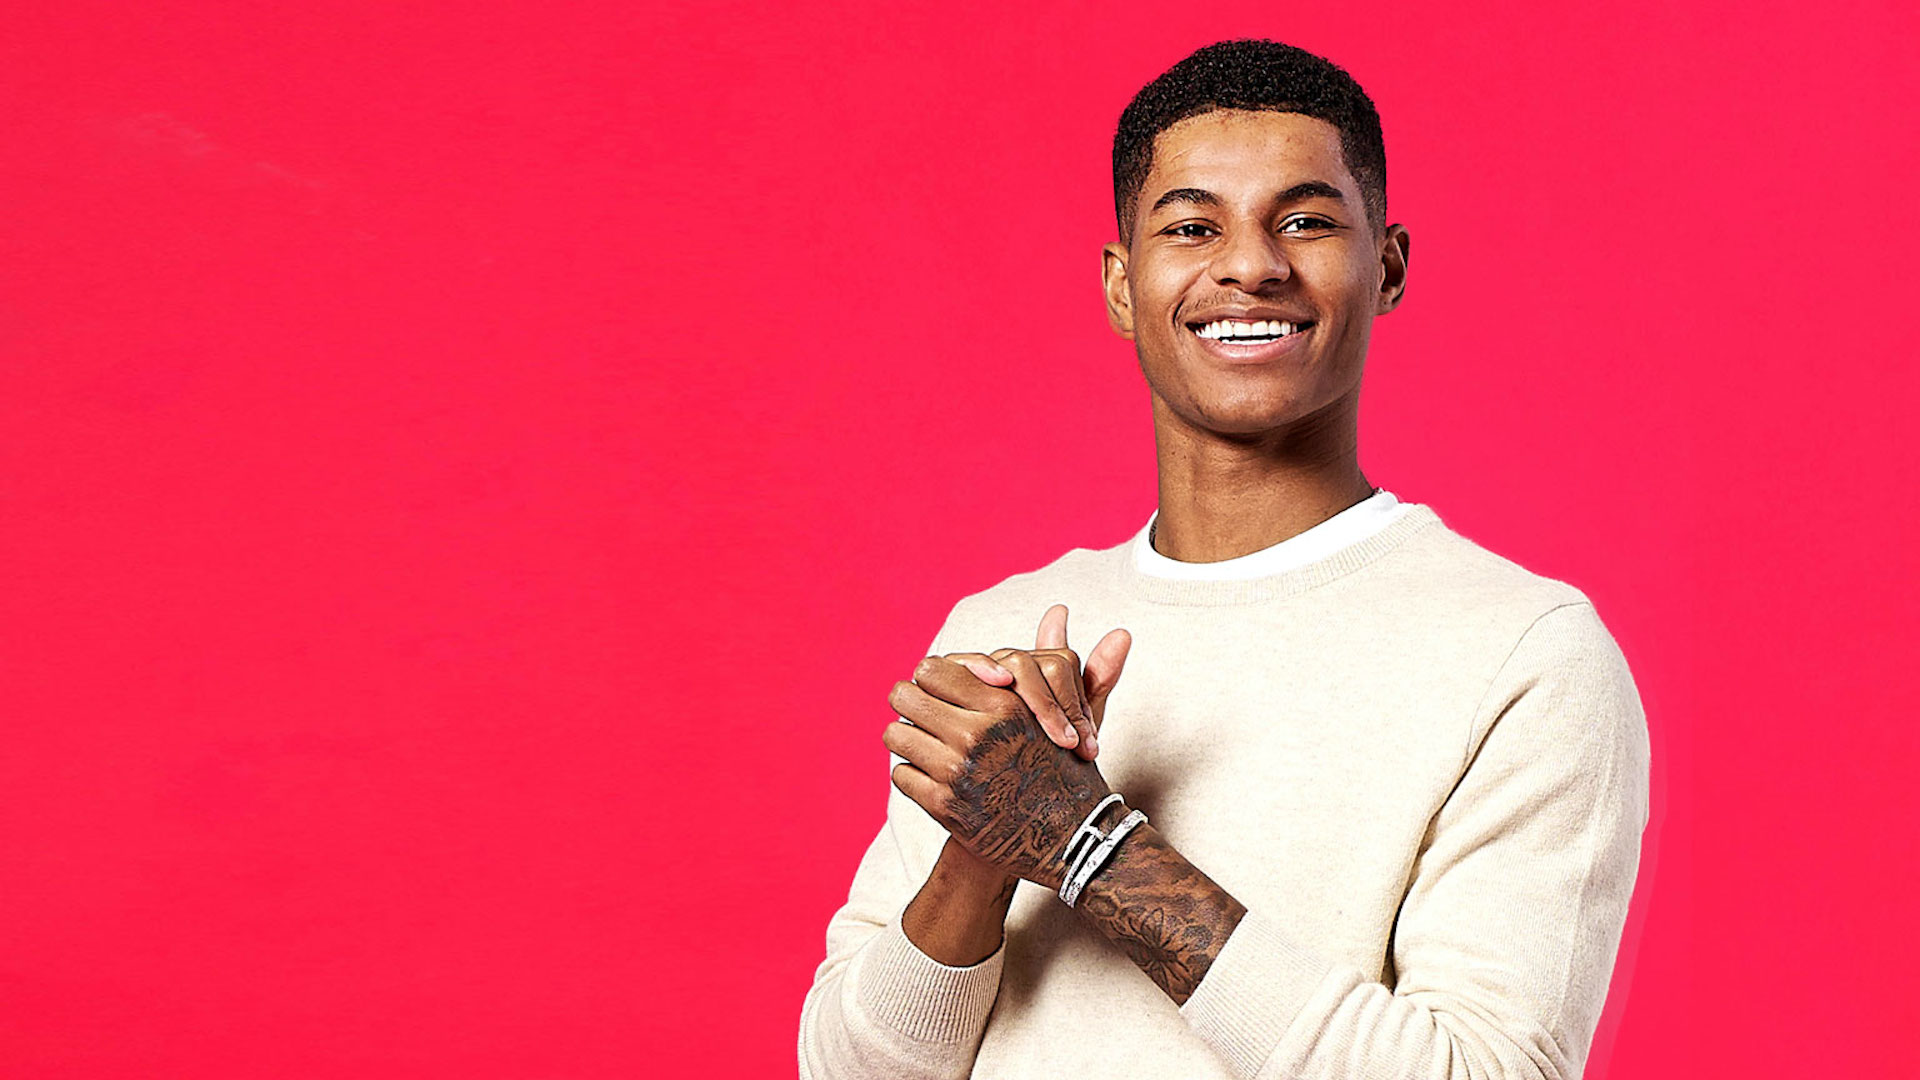 Marcus Rashford smiles and rubs his hands together